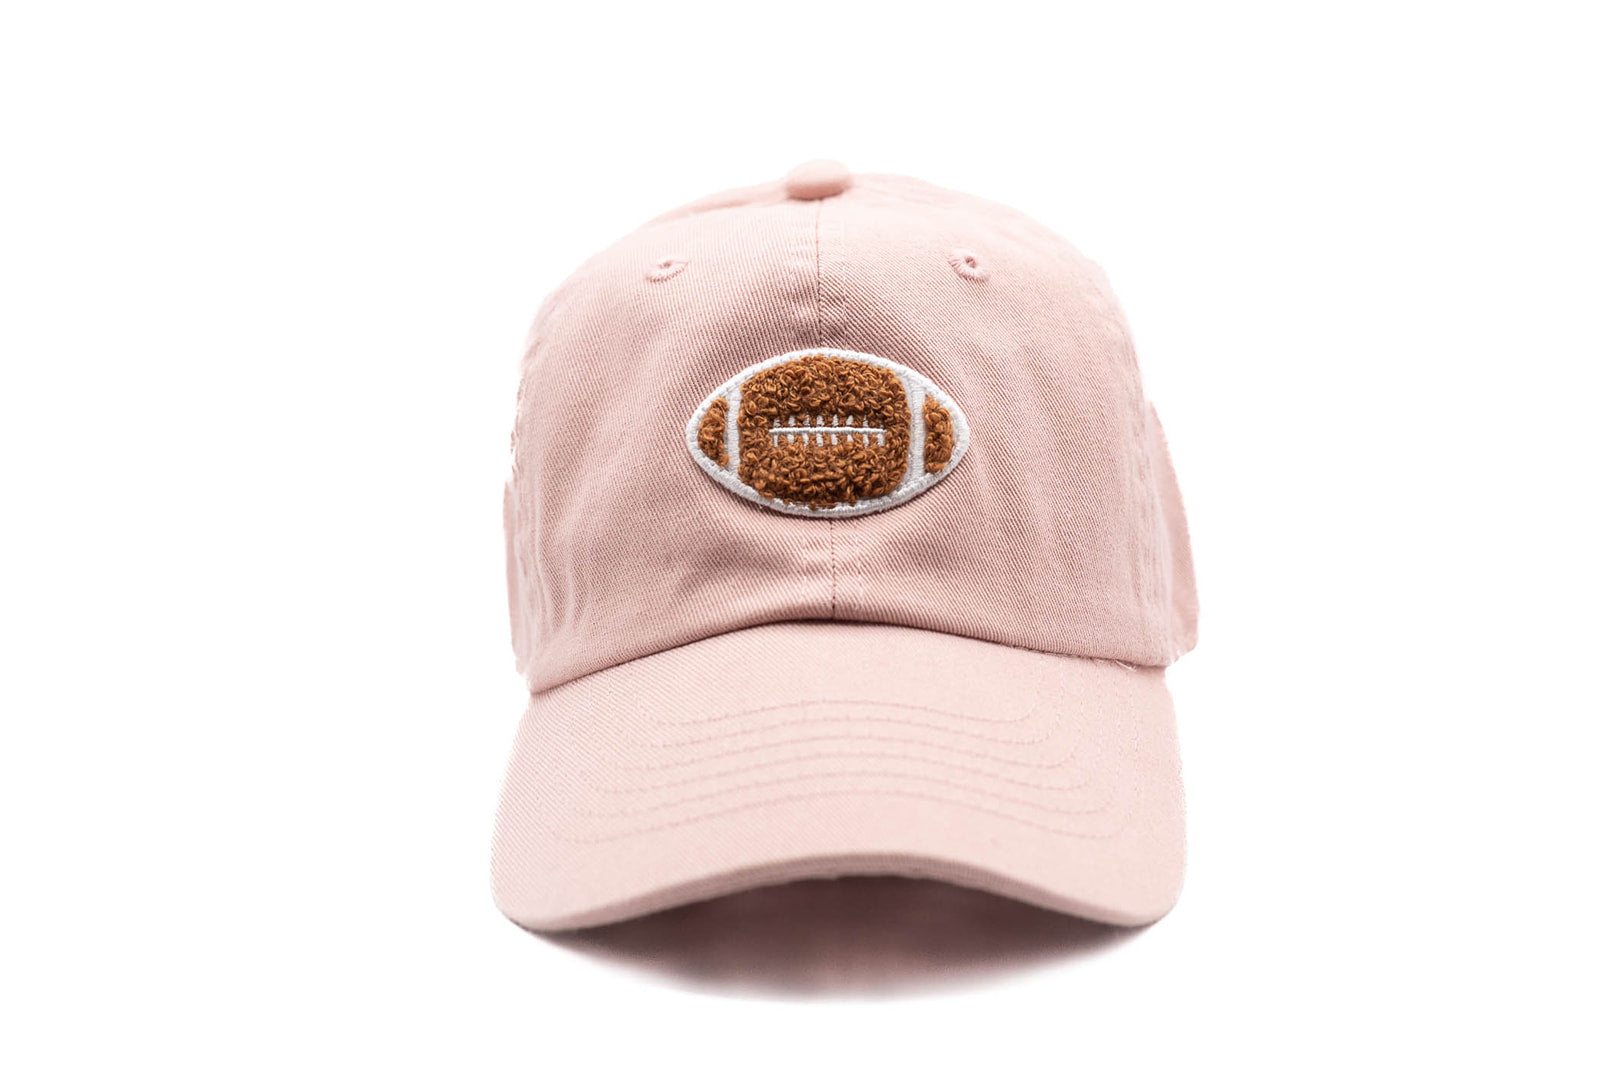 Dusty Rose Hat + Terry Football